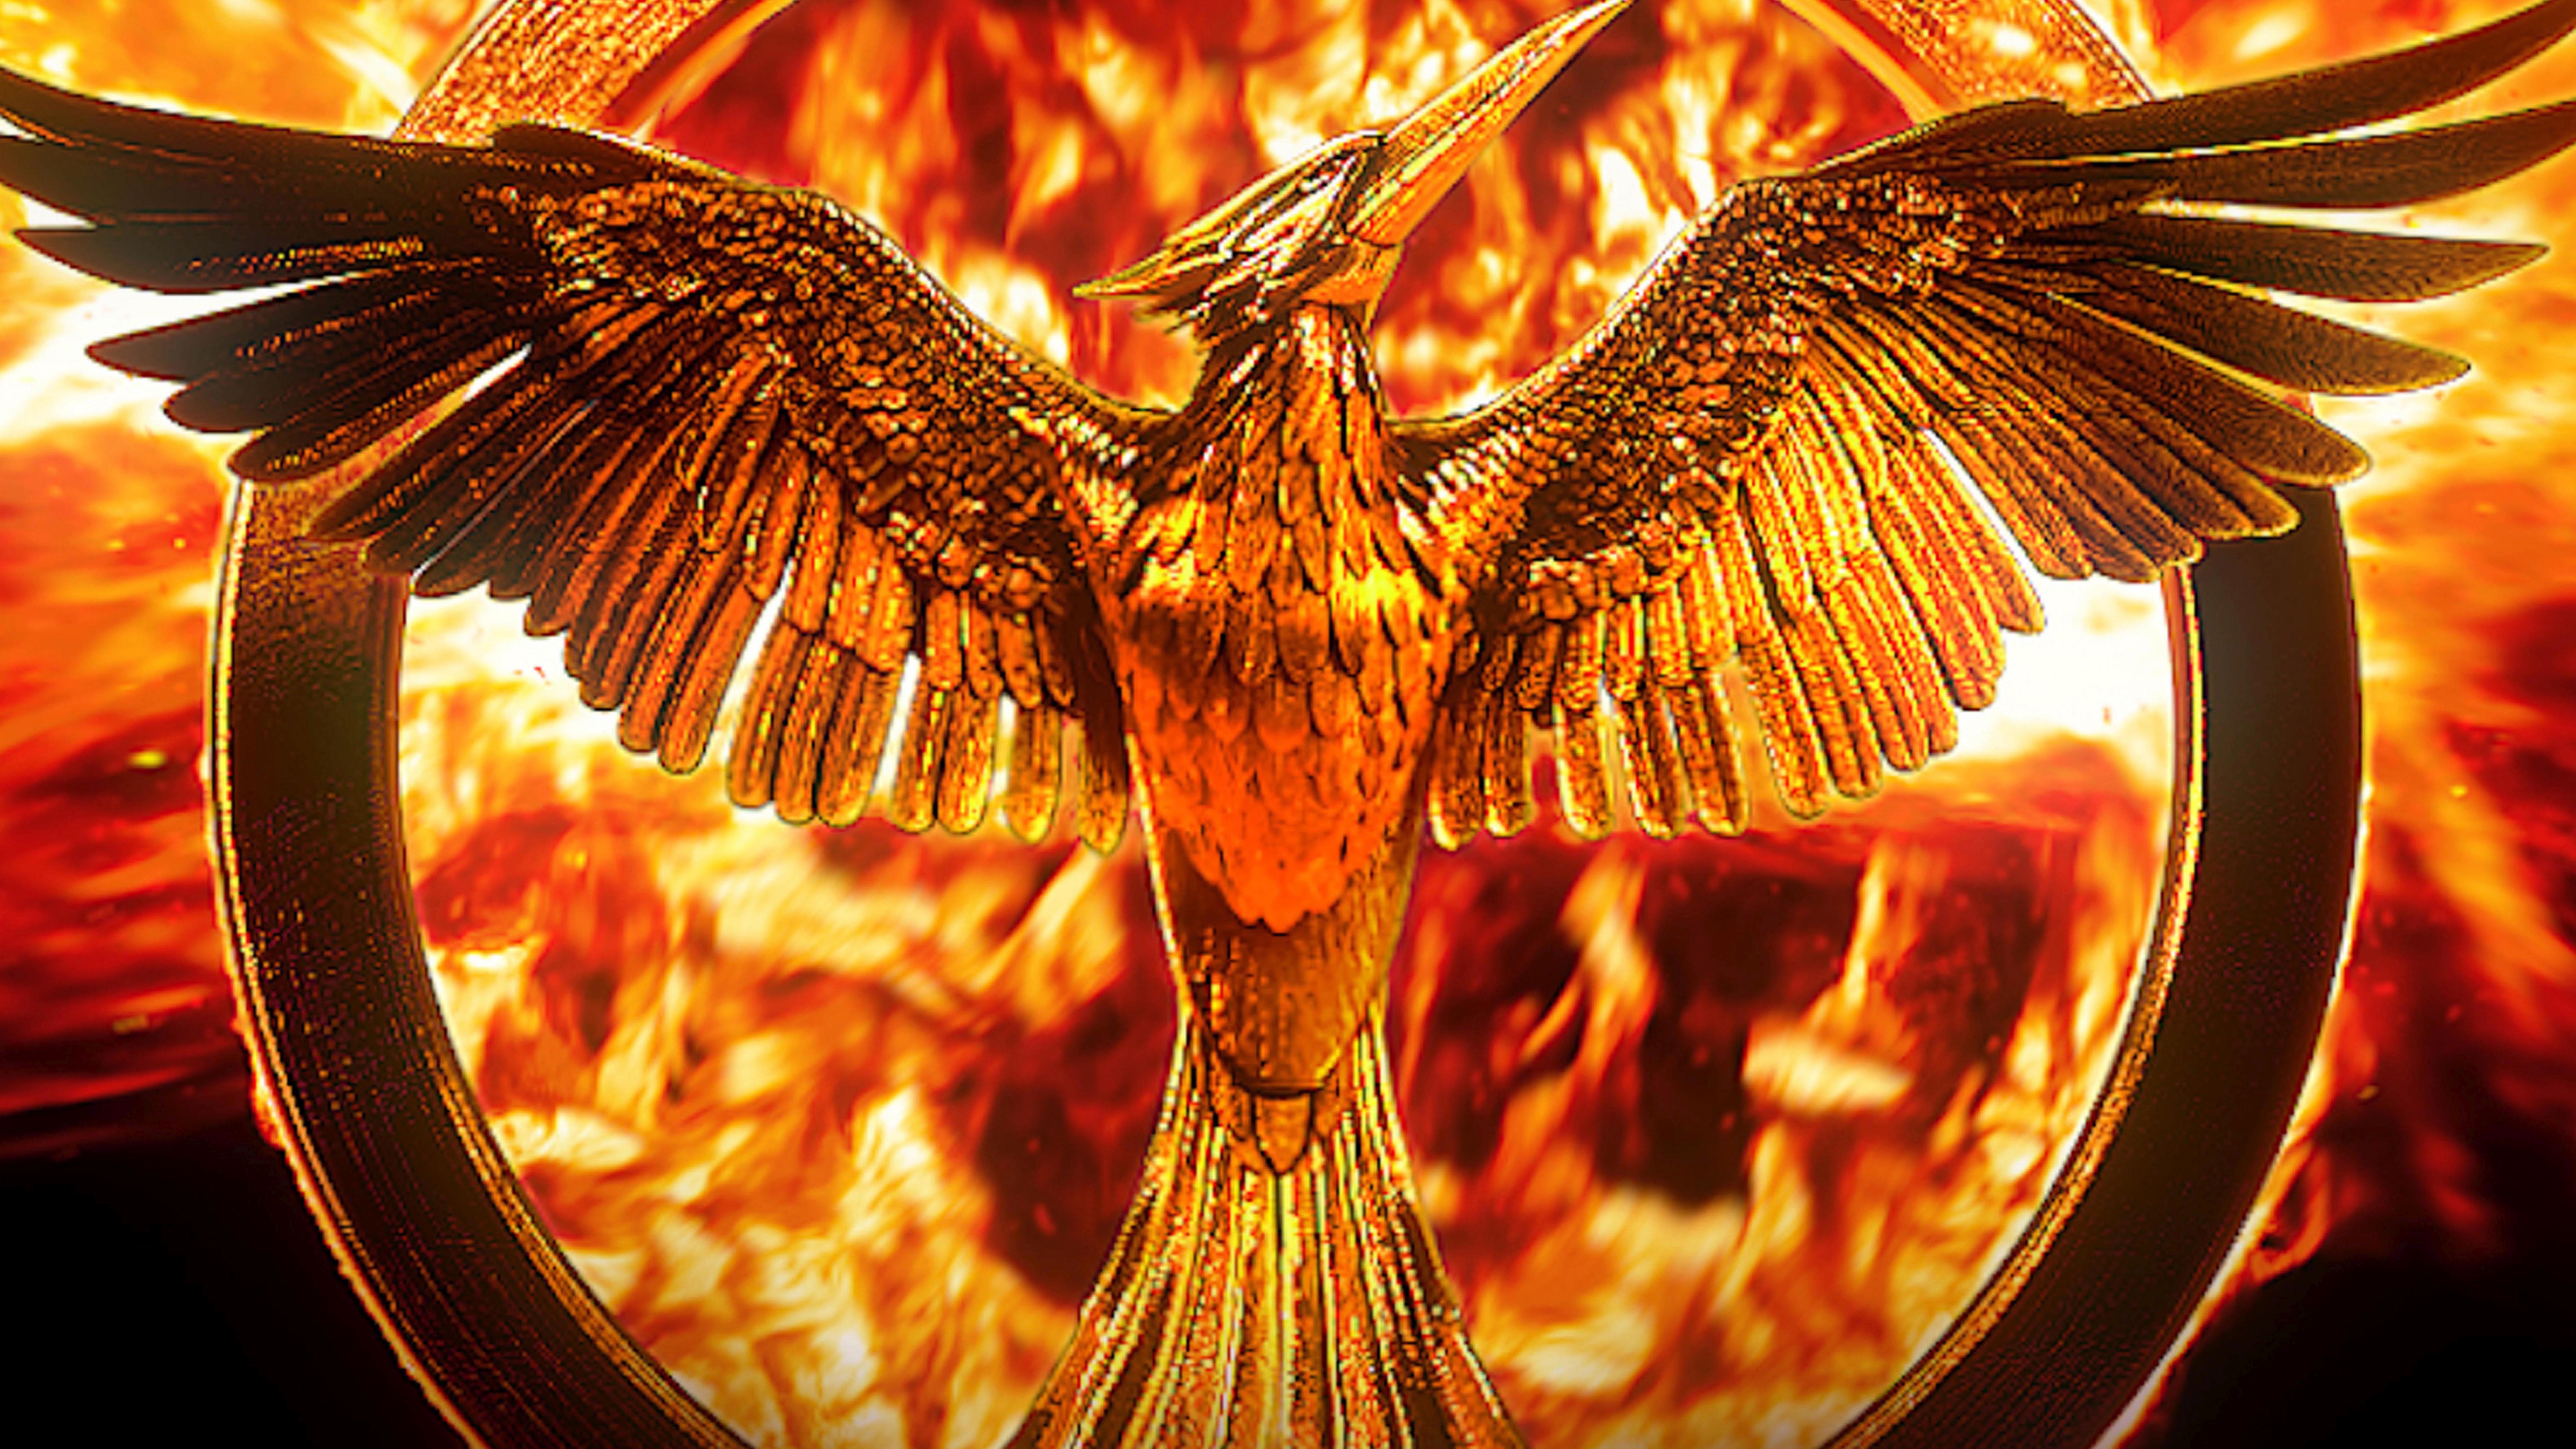 The Hunger Games Mockingjay   Part 2 Backgrounds Pictures Images